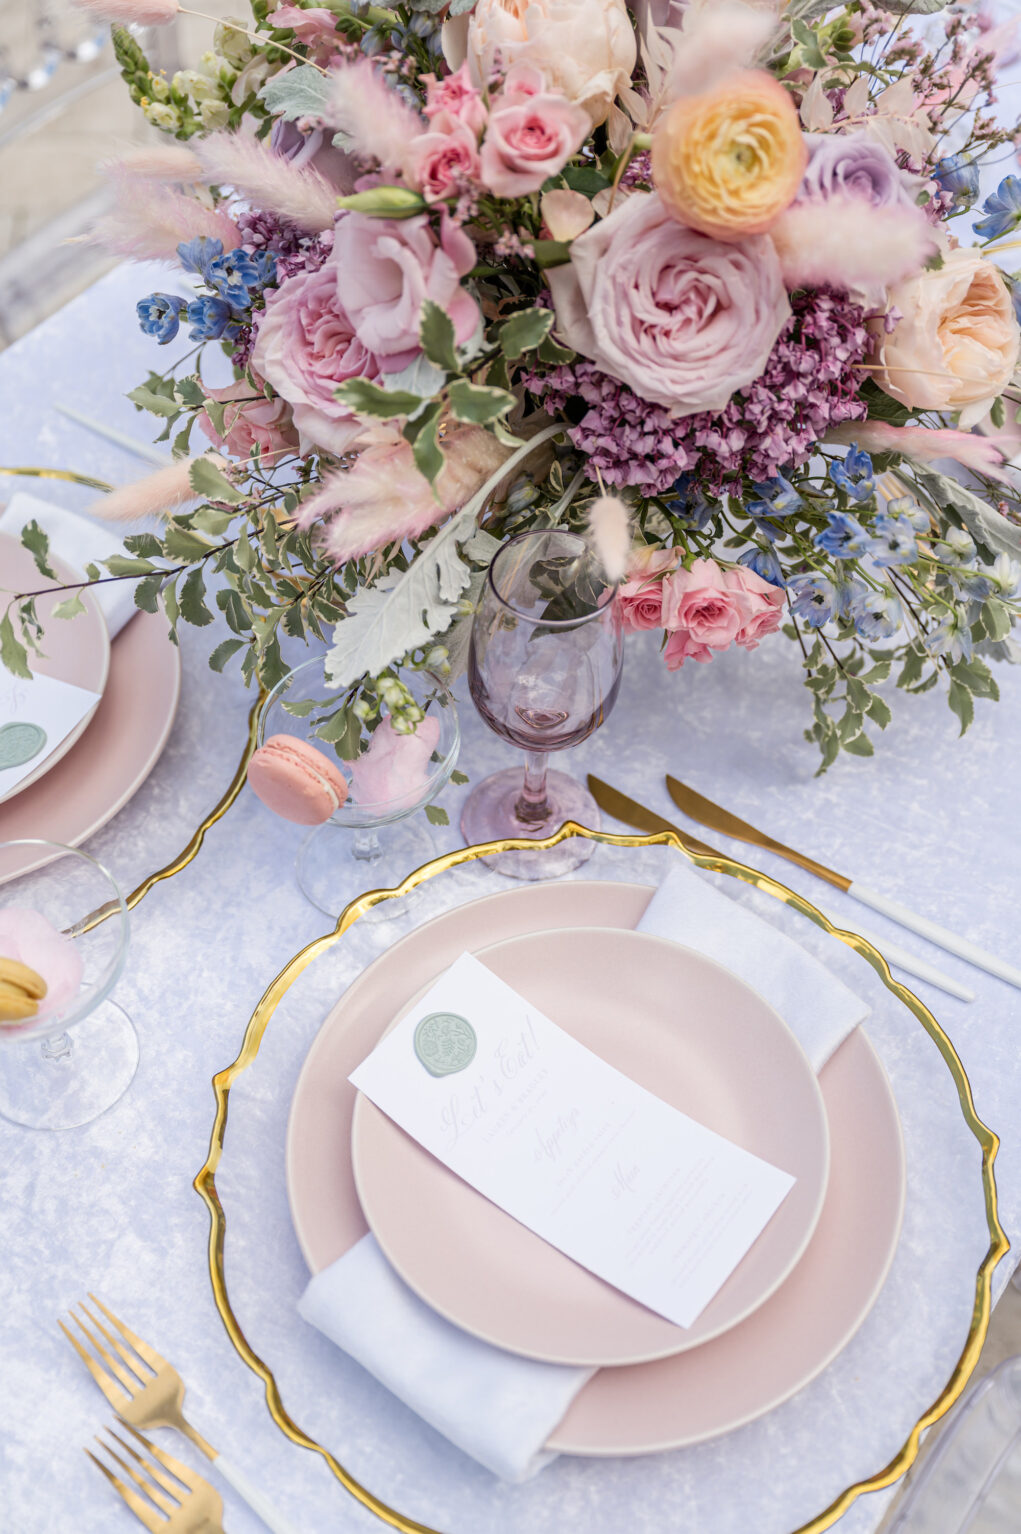 Spring Garden Purple, Orange and Pink Roses, Blue Stock Flowers, and Greenery Centerpieces | Gold Flatware with Gold-rimmed Chargers and Blush Plate | Whimsical Garden Wedding Reception Inspiration | Sarasota Planner MDP Events | Florist Save The Date Florida